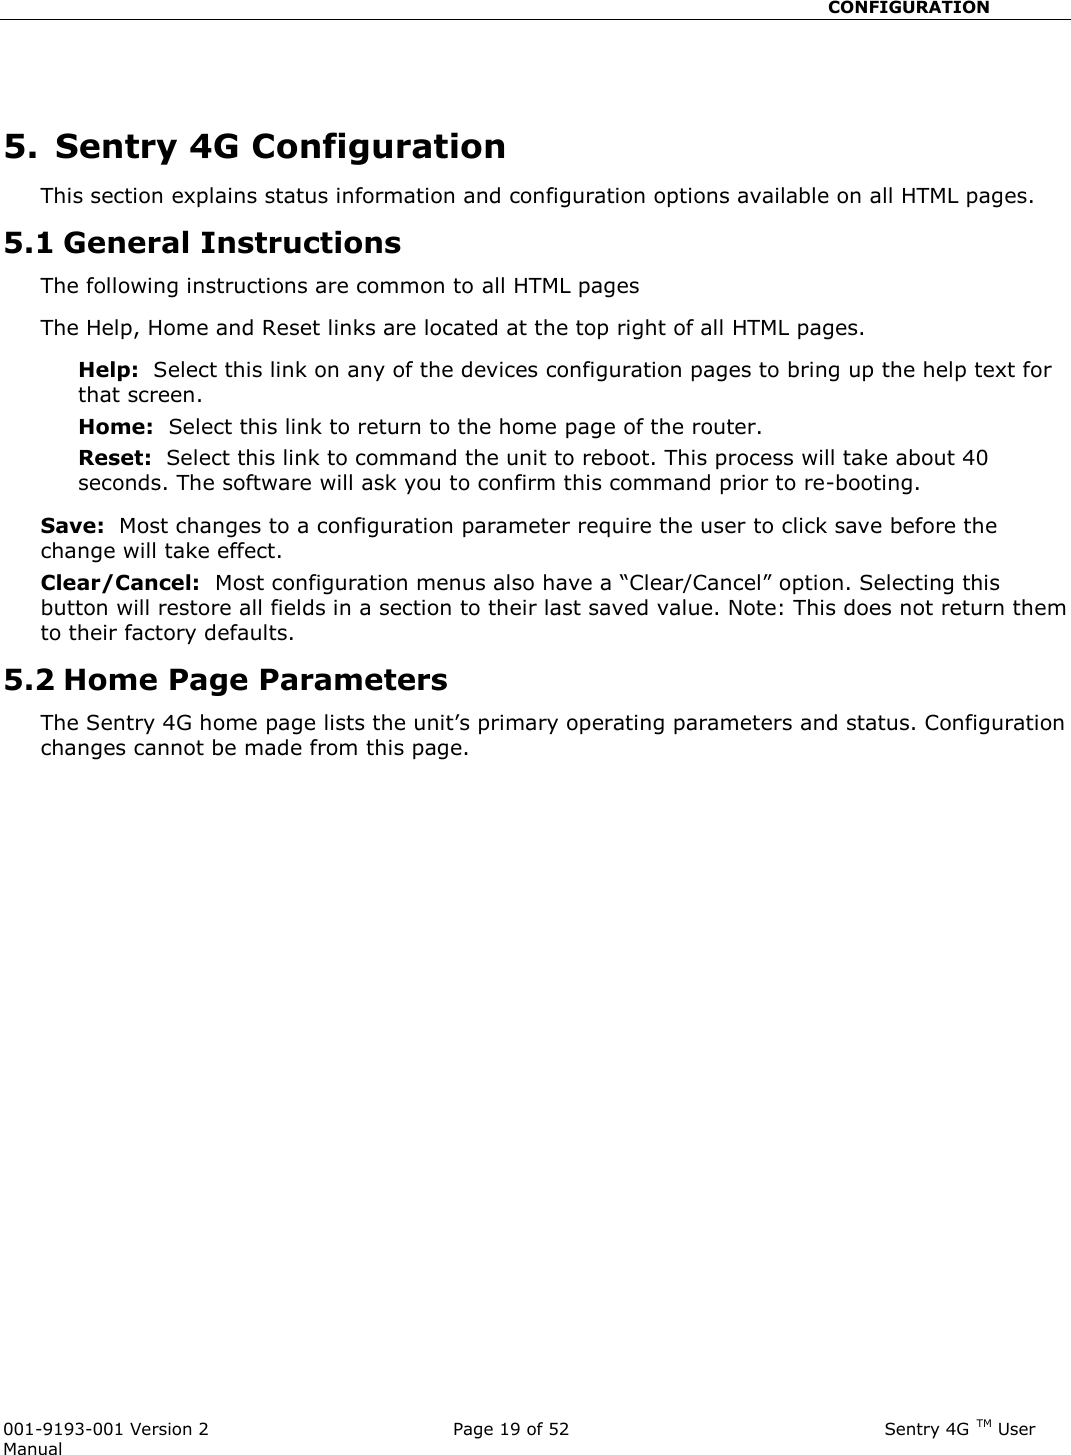                                                       CONFIGURATION  001-9193-001 Version 2              Page 19 of 52                              Sentry 4G TM User Manual  5.  Sentry 4G Configuration This section explains status information and configuration options available on all HTML pages.   5.1 General Instructions The following instructions are common to all HTML pages The Help, Home and Reset links are located at the top right of all HTML pages.   Help:  Select this link on any of the devices configuration pages to bring up the help text for that screen.   Home:  Select this link to return to the home page of the router.   Reset:  Select this link to command the unit to reboot. This process will take about 40 seconds. The software will ask you to confirm this command prior to re-booting.     Save:  Most changes to a configuration parameter require the user to click save before the change will take effect.   Clear/Cancel:  Most configuration menus also have a “Clear/Cancel” option. Selecting this button will restore all fields in a section to their last saved value. Note: This does not return them to their factory defaults.   5.2 Home Page Parameters The Sentry 4G home page lists the unit’s primary operating parameters and status. Configuration changes cannot be made from this page.     